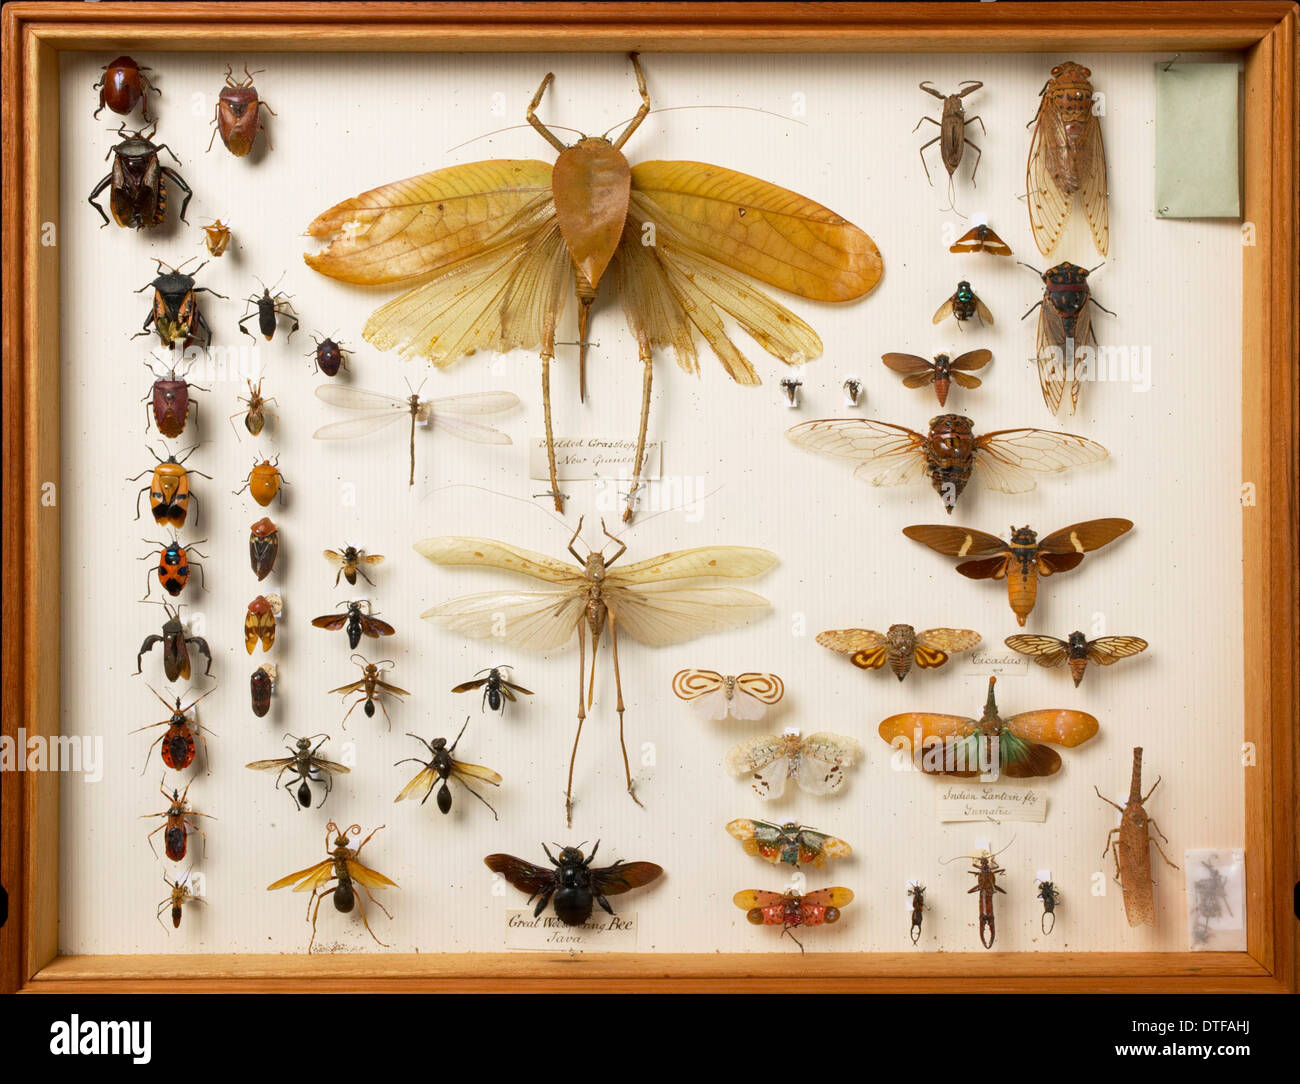 Specimens of crickets and other insects from the Wallace Collection Stock Photo